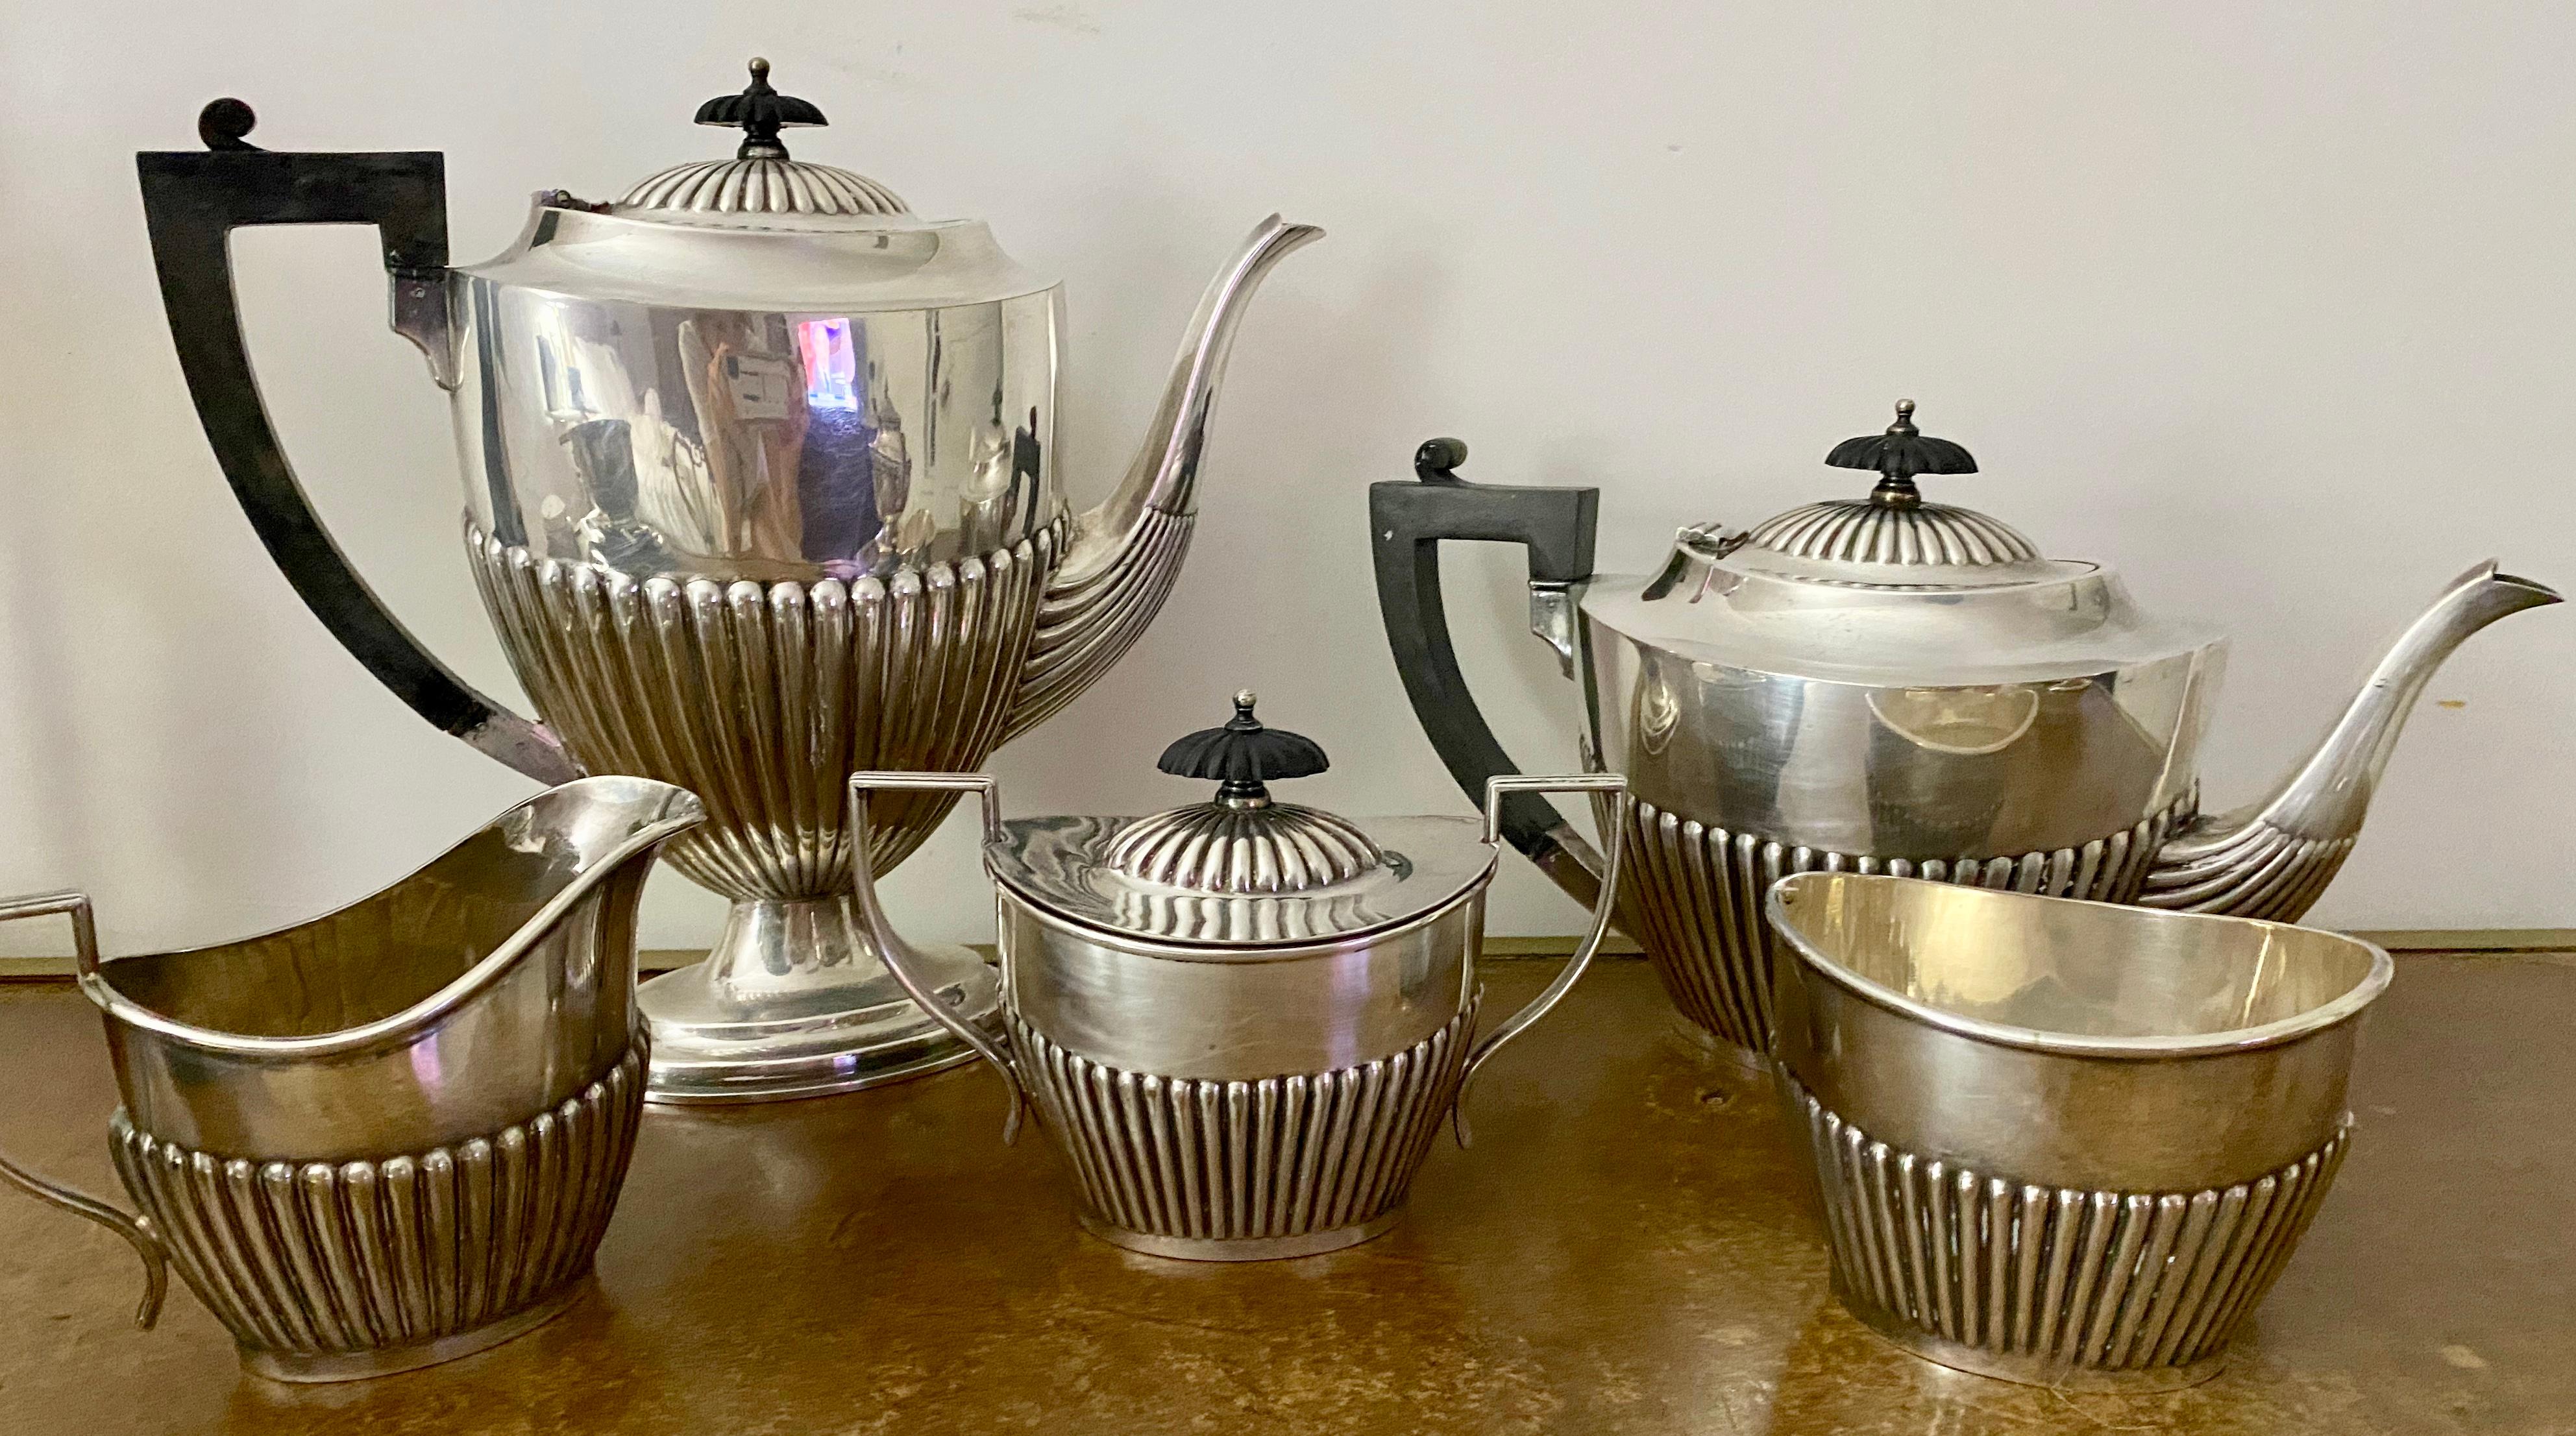 Entertain in style with this Victorian Queen Anne Style silver-plate tea set with black bakelite handles and lid knobs. The lower portion of each item is embellished with embossed fluted decoration in the Queen Anne style.
Coffee pot - 11 x 4.5 x